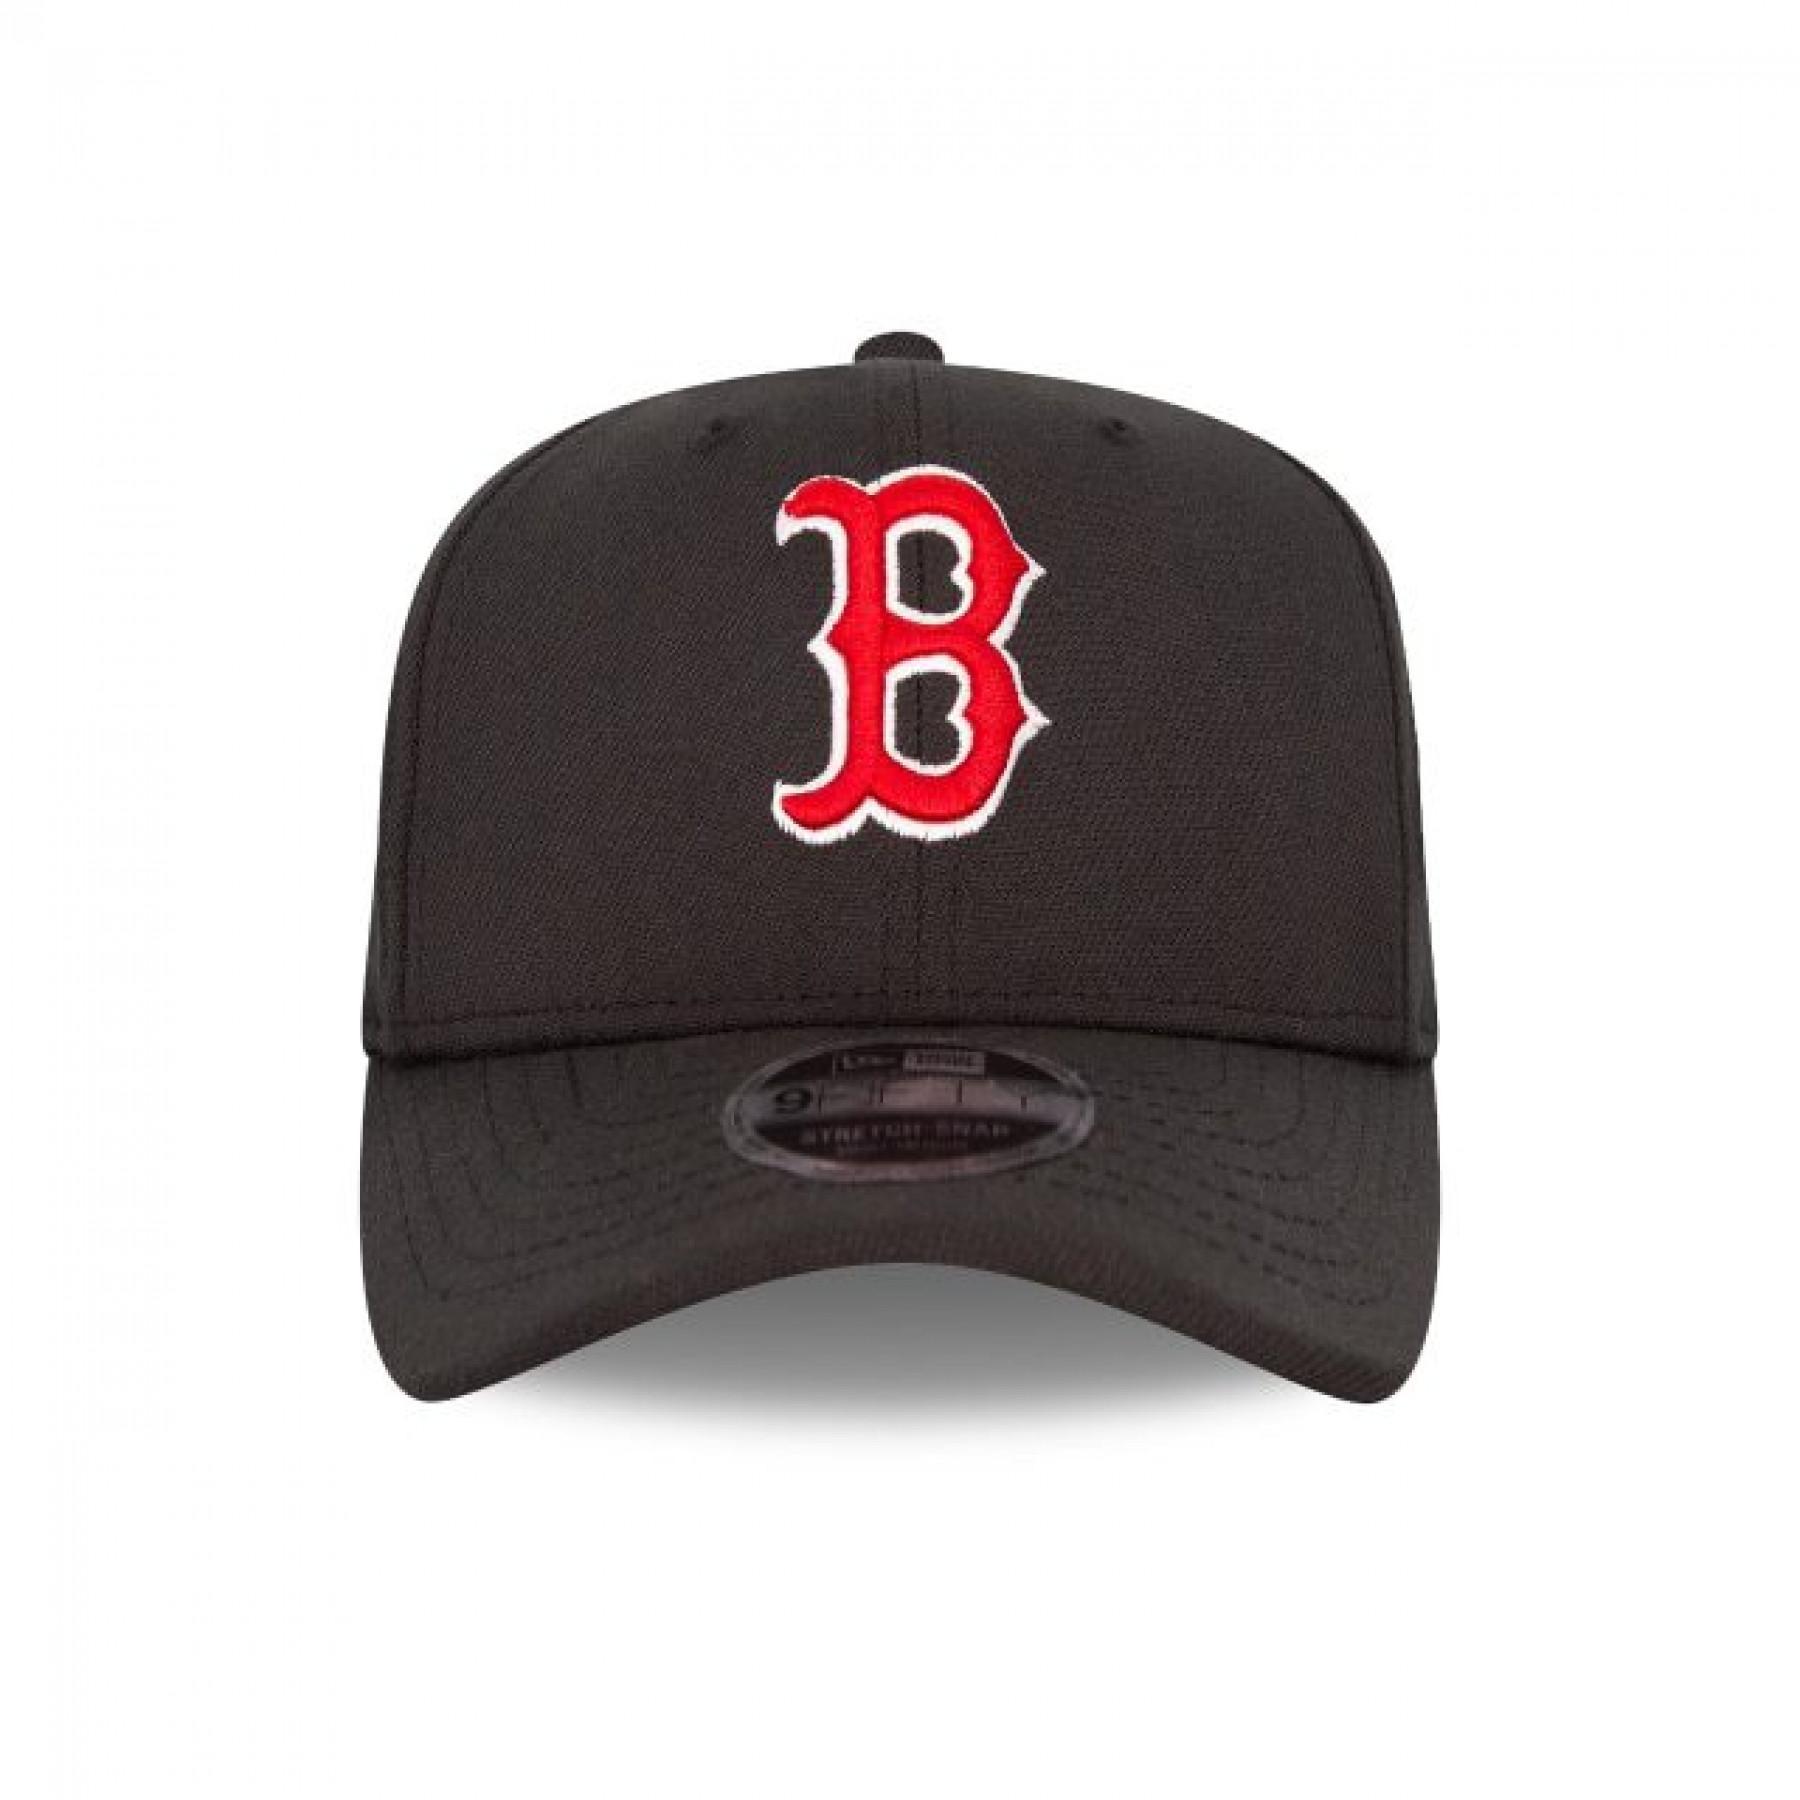 Kappe New Era Stretch Snap 9FIFTY Boston Red Sox